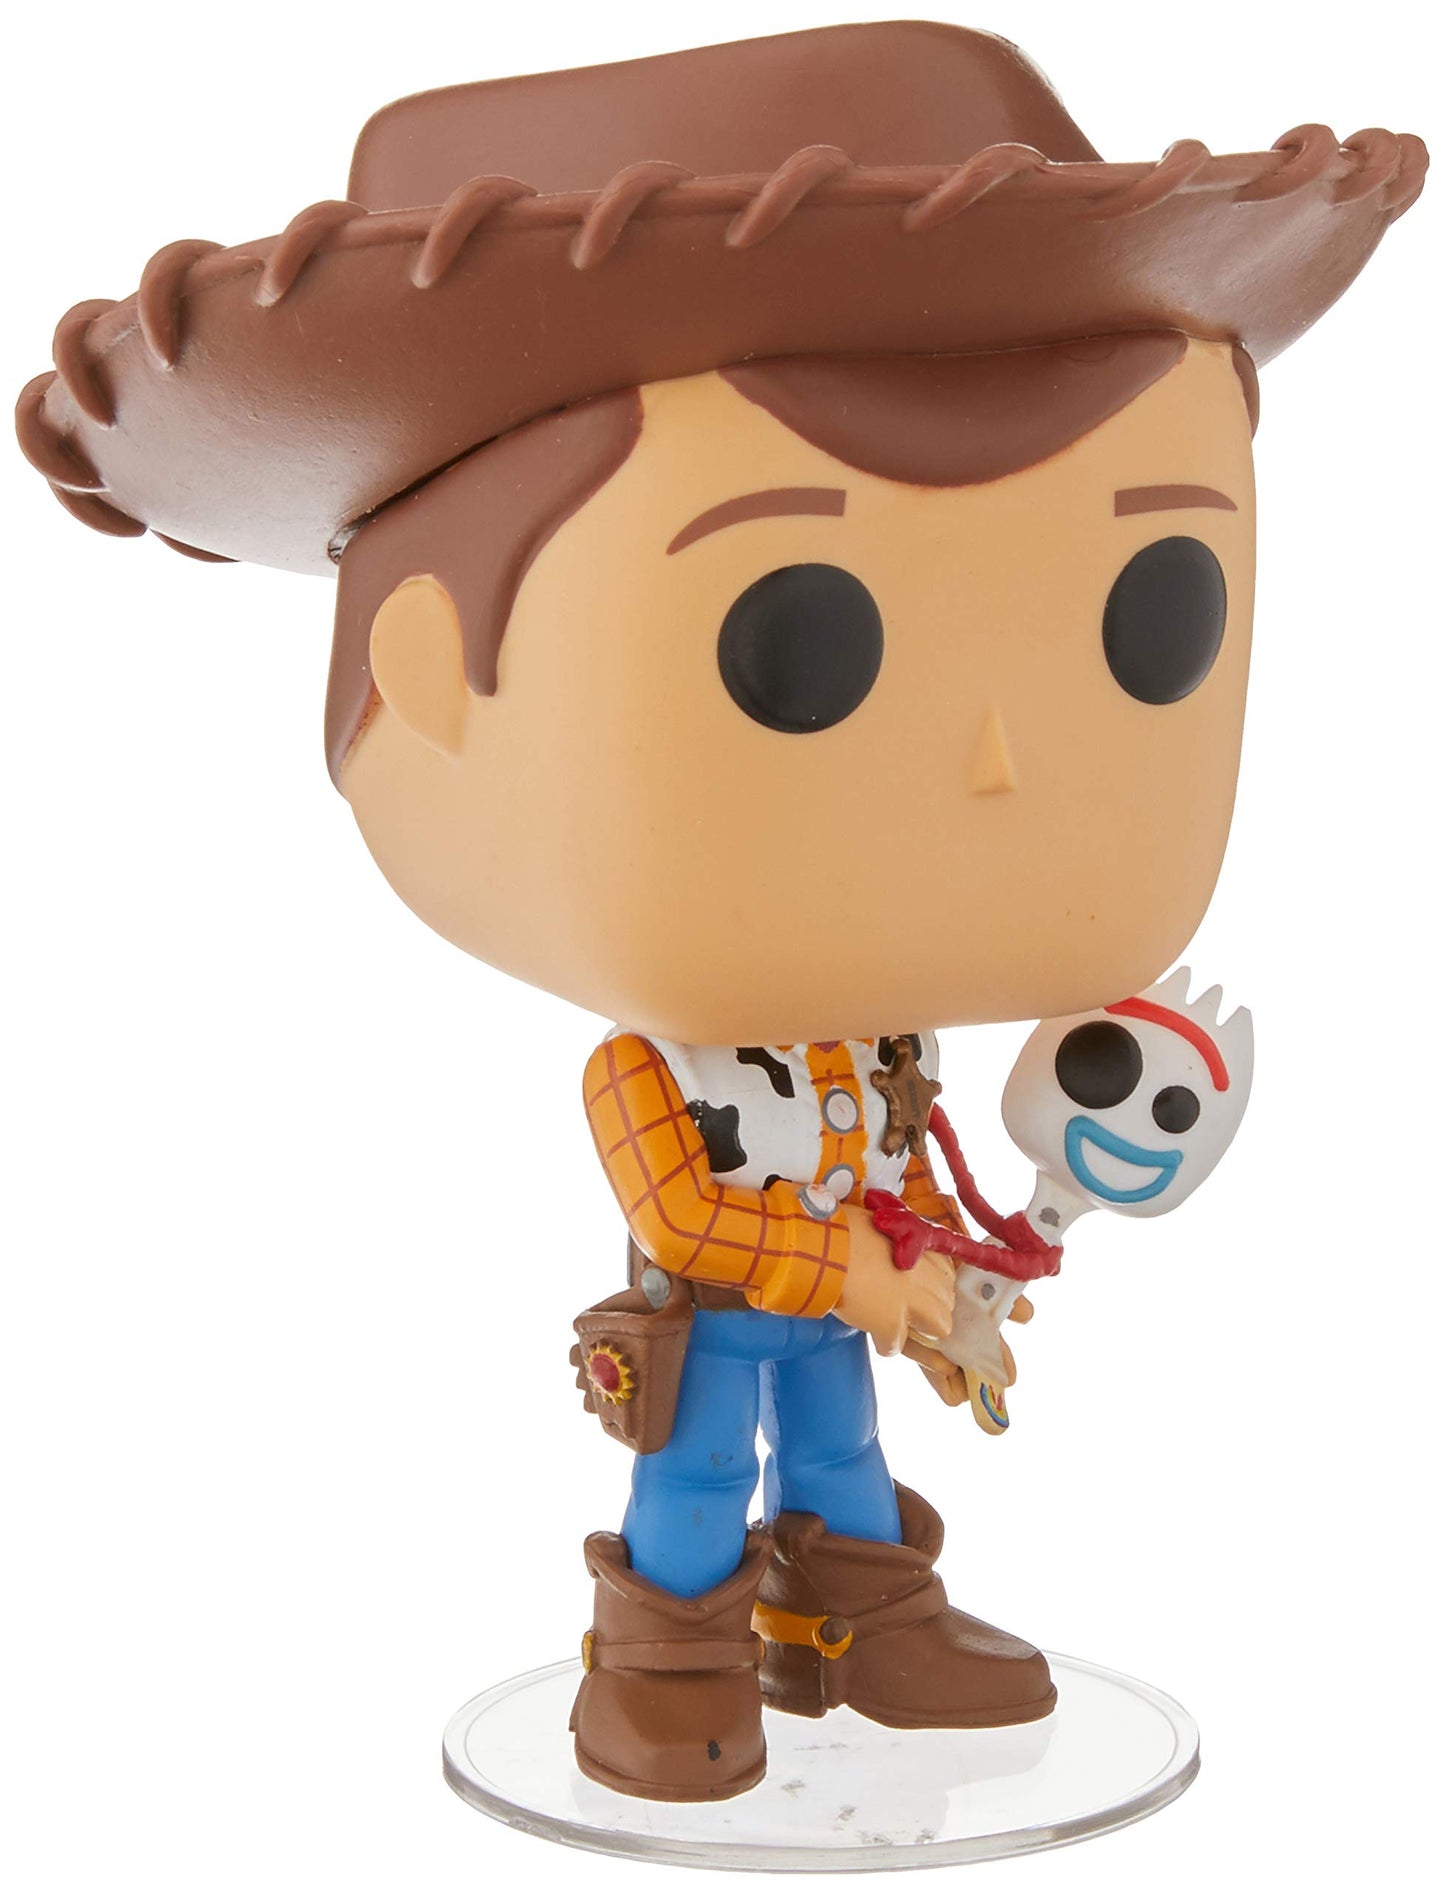 Funko POP! Disney Pixar Story 4 Sheriff Woody Holding Forky Exclusive #535